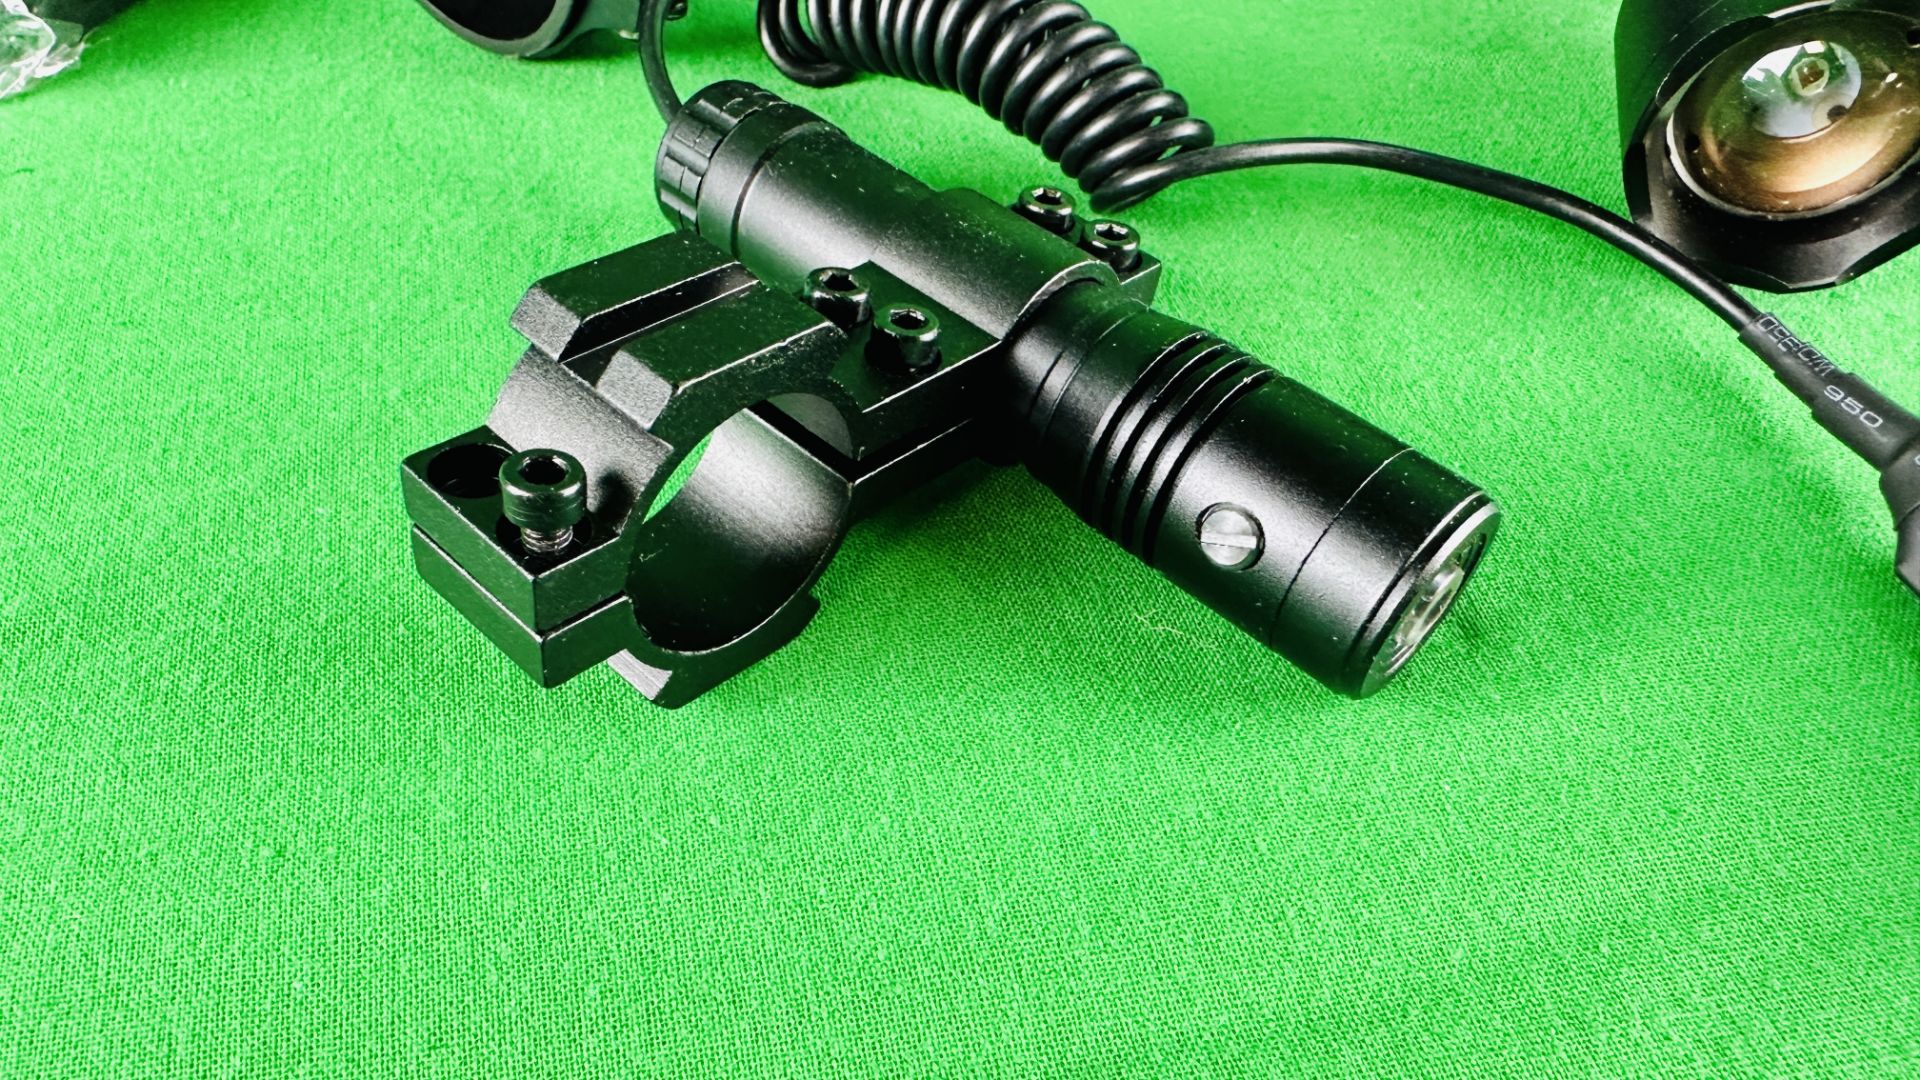 PARD DIGITAL NIGHT VISION SCOPE MODEL NV007V COMPLETE WITH CHARGER PLUS WESLITE RED LIGHT TORCH. - Image 2 of 13